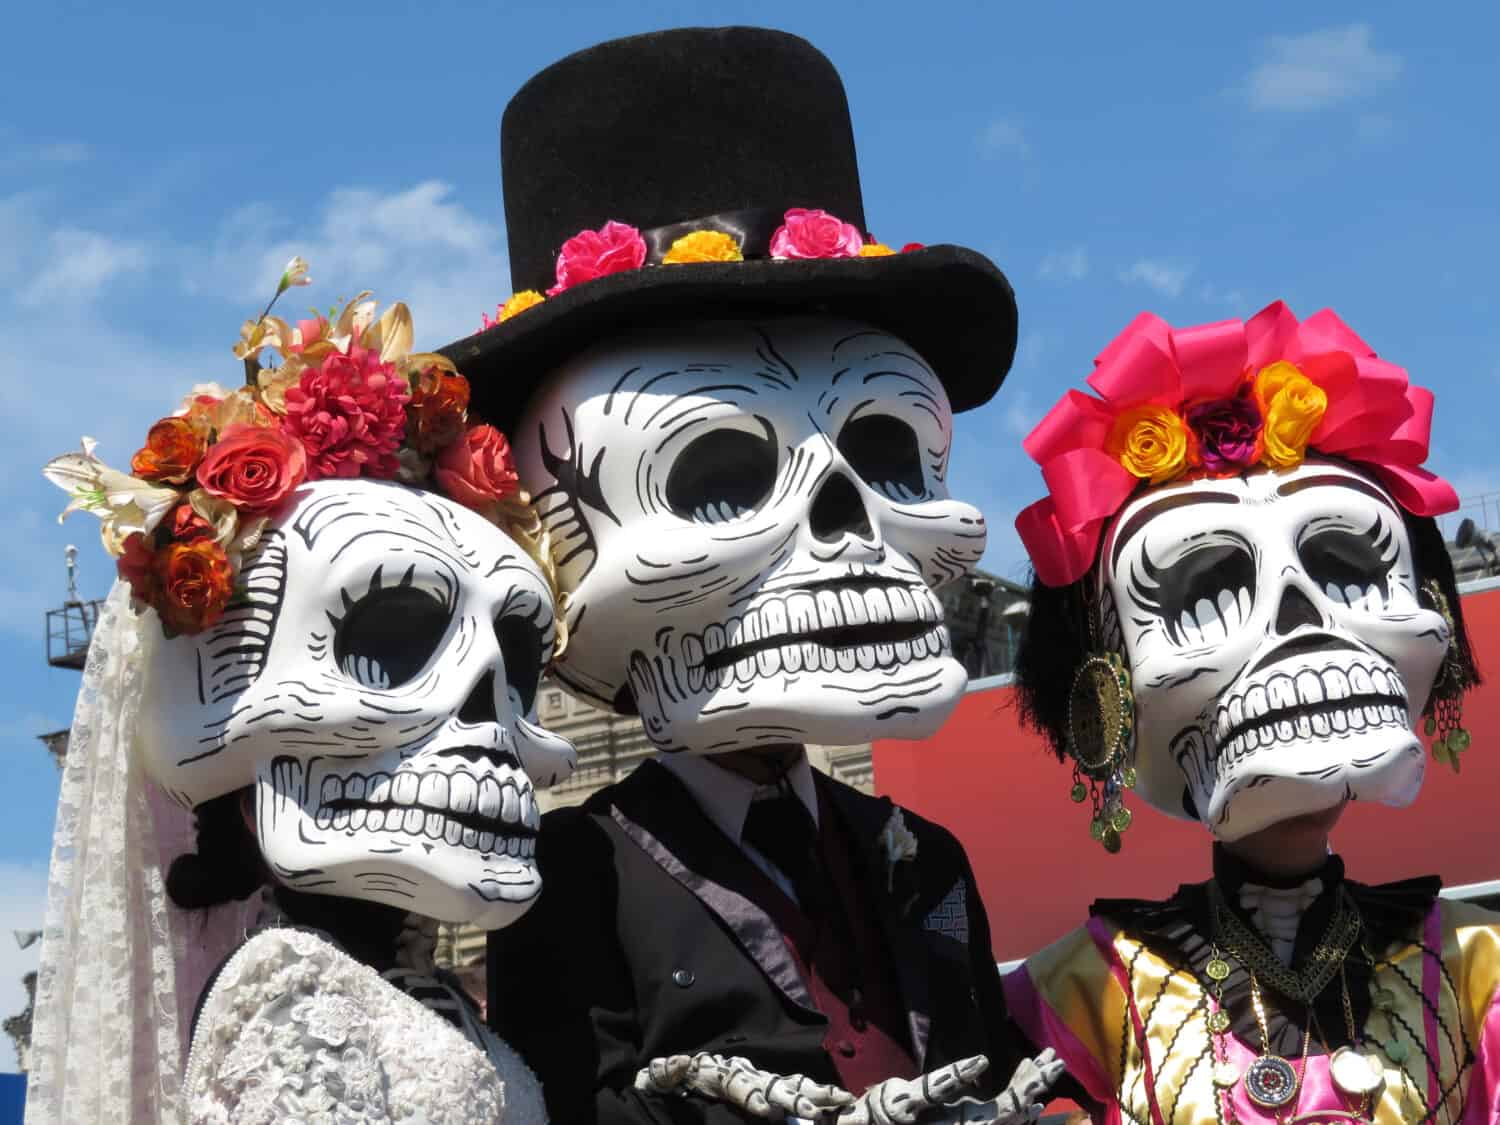 Dia de los Muertos, Day of the Dead. Participants of the Mexican holiday in death masks